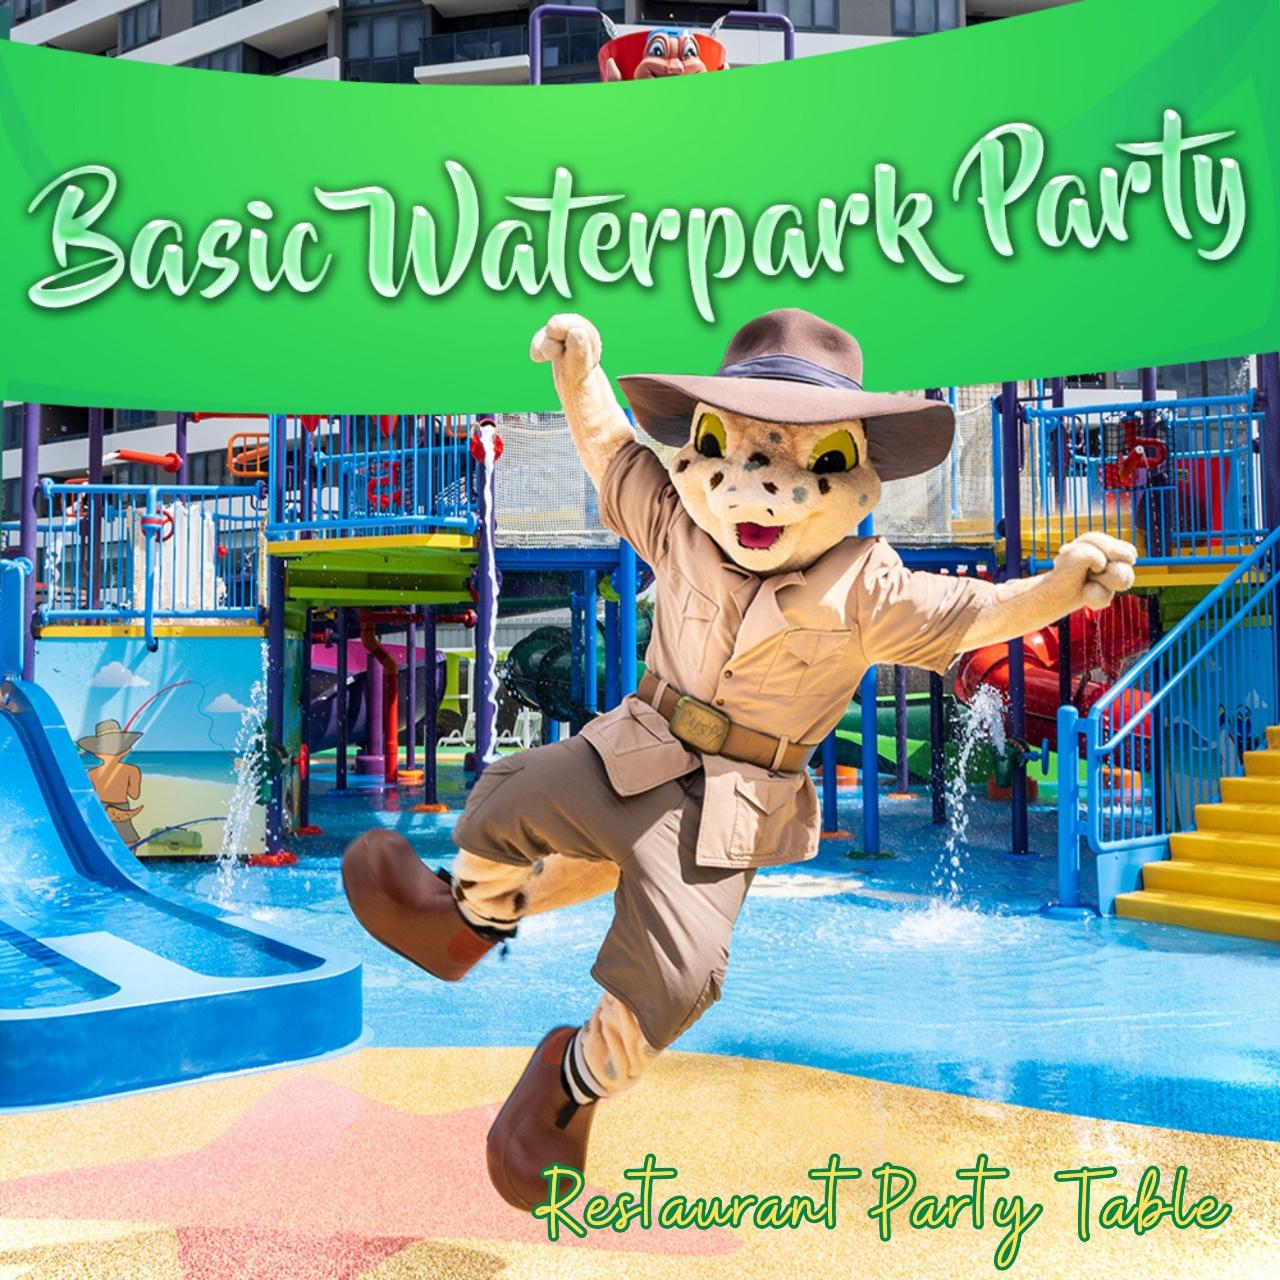 Basic Waterpark Party - RESTAURANT PARTY TABLE (min 5 kids)